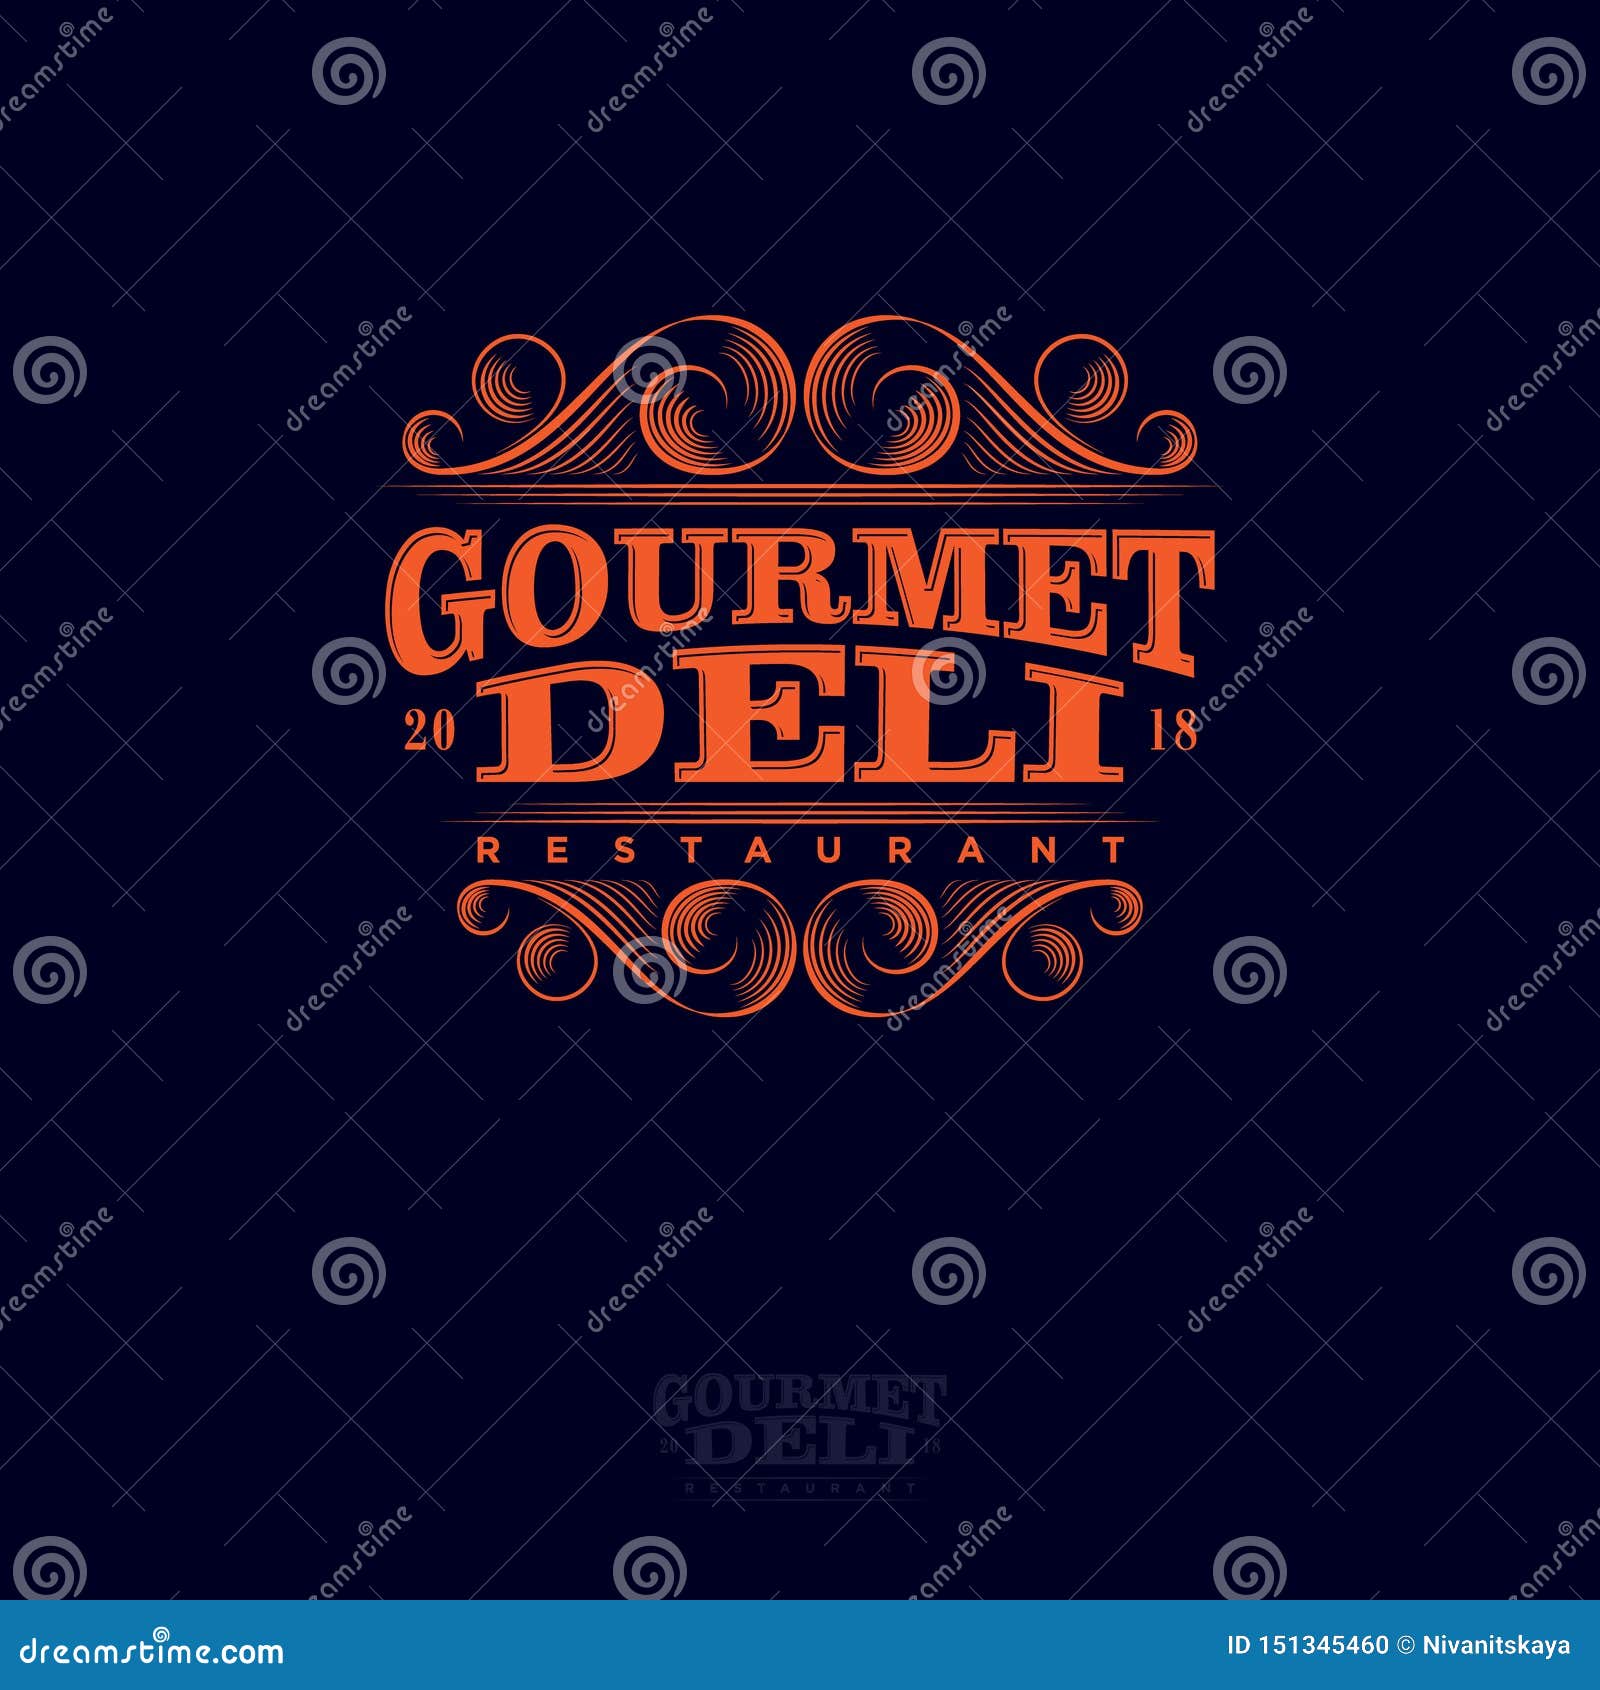 gourmet and deli restaurant logo. lettering composition and curlicues decorative s.